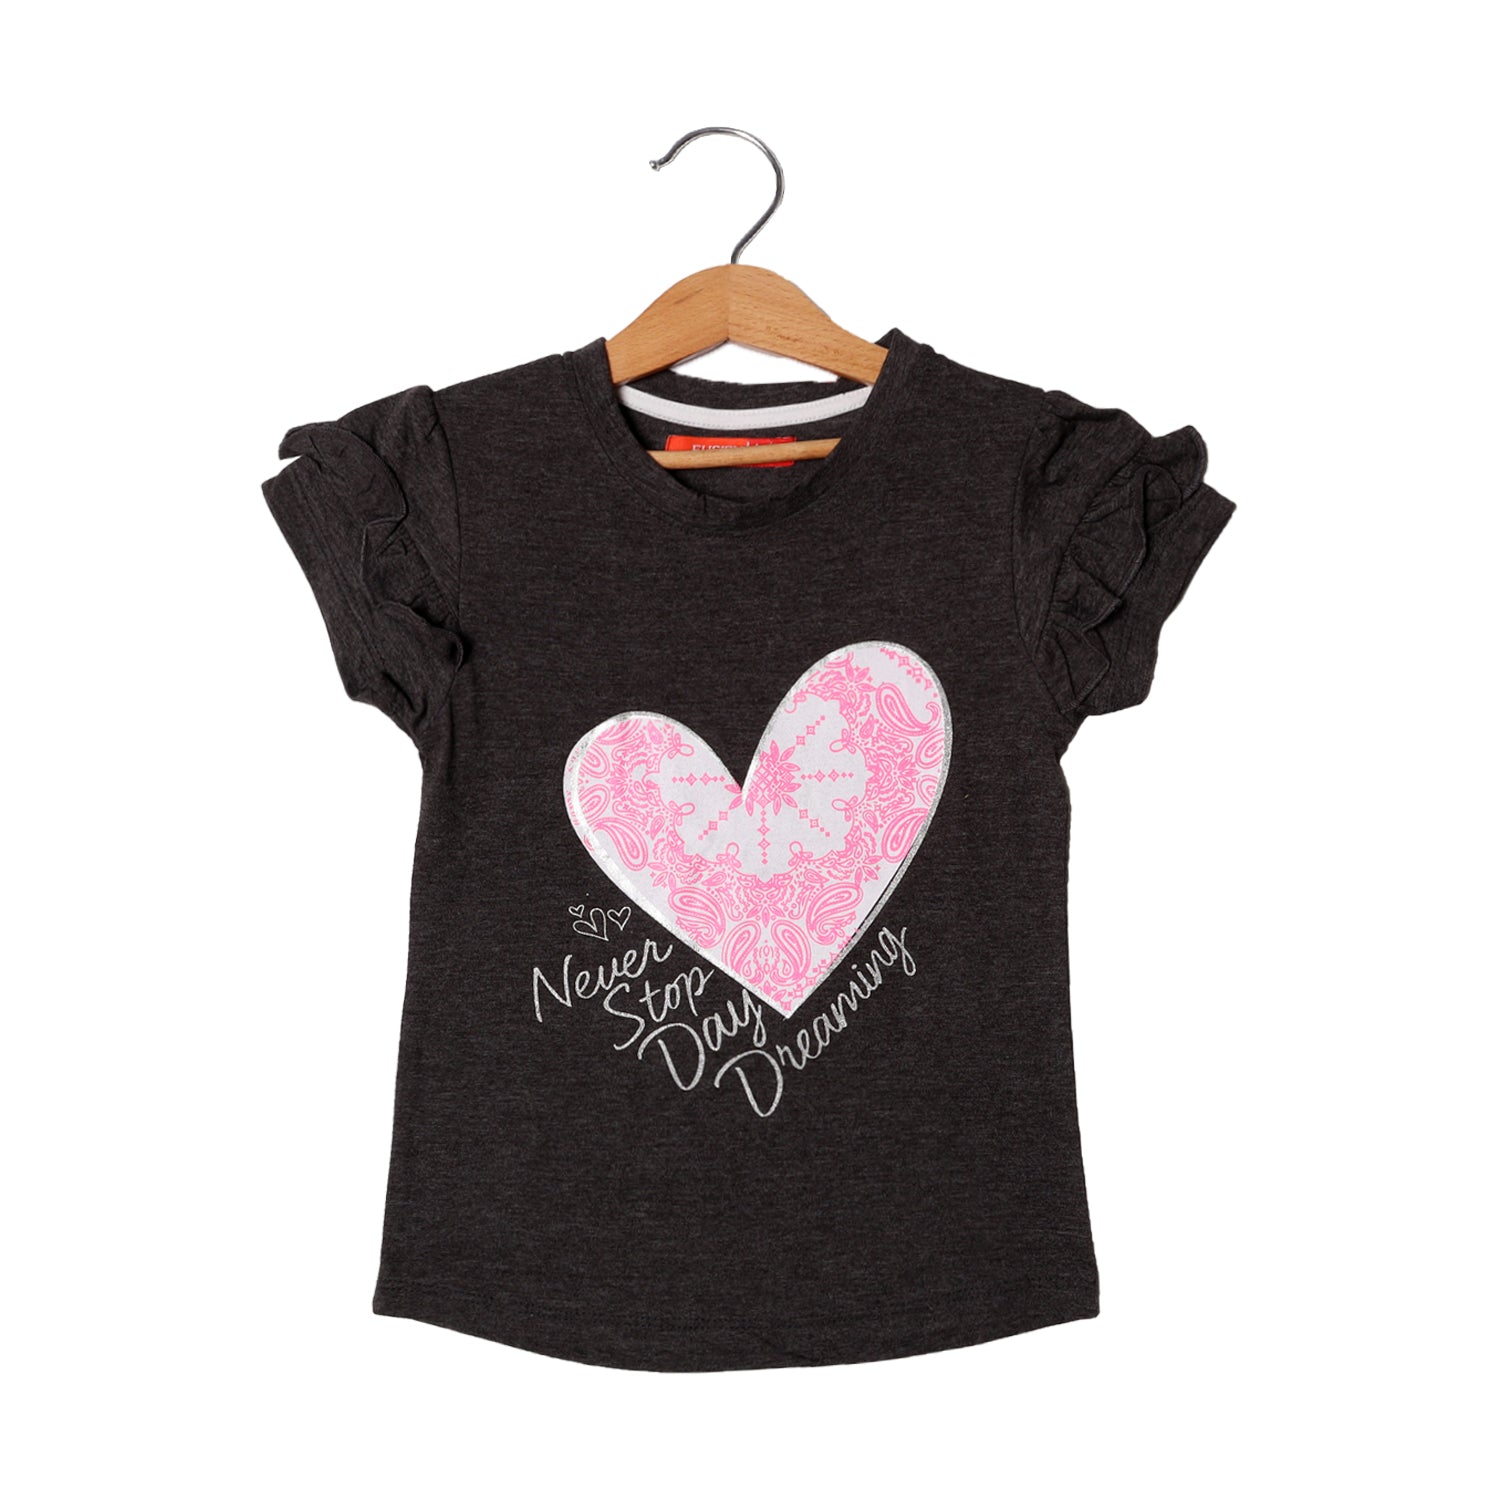 CHARCOAL GREY NEVER STOP DAY DREAMING PRINTED T-SHIRT FOR GIRLS